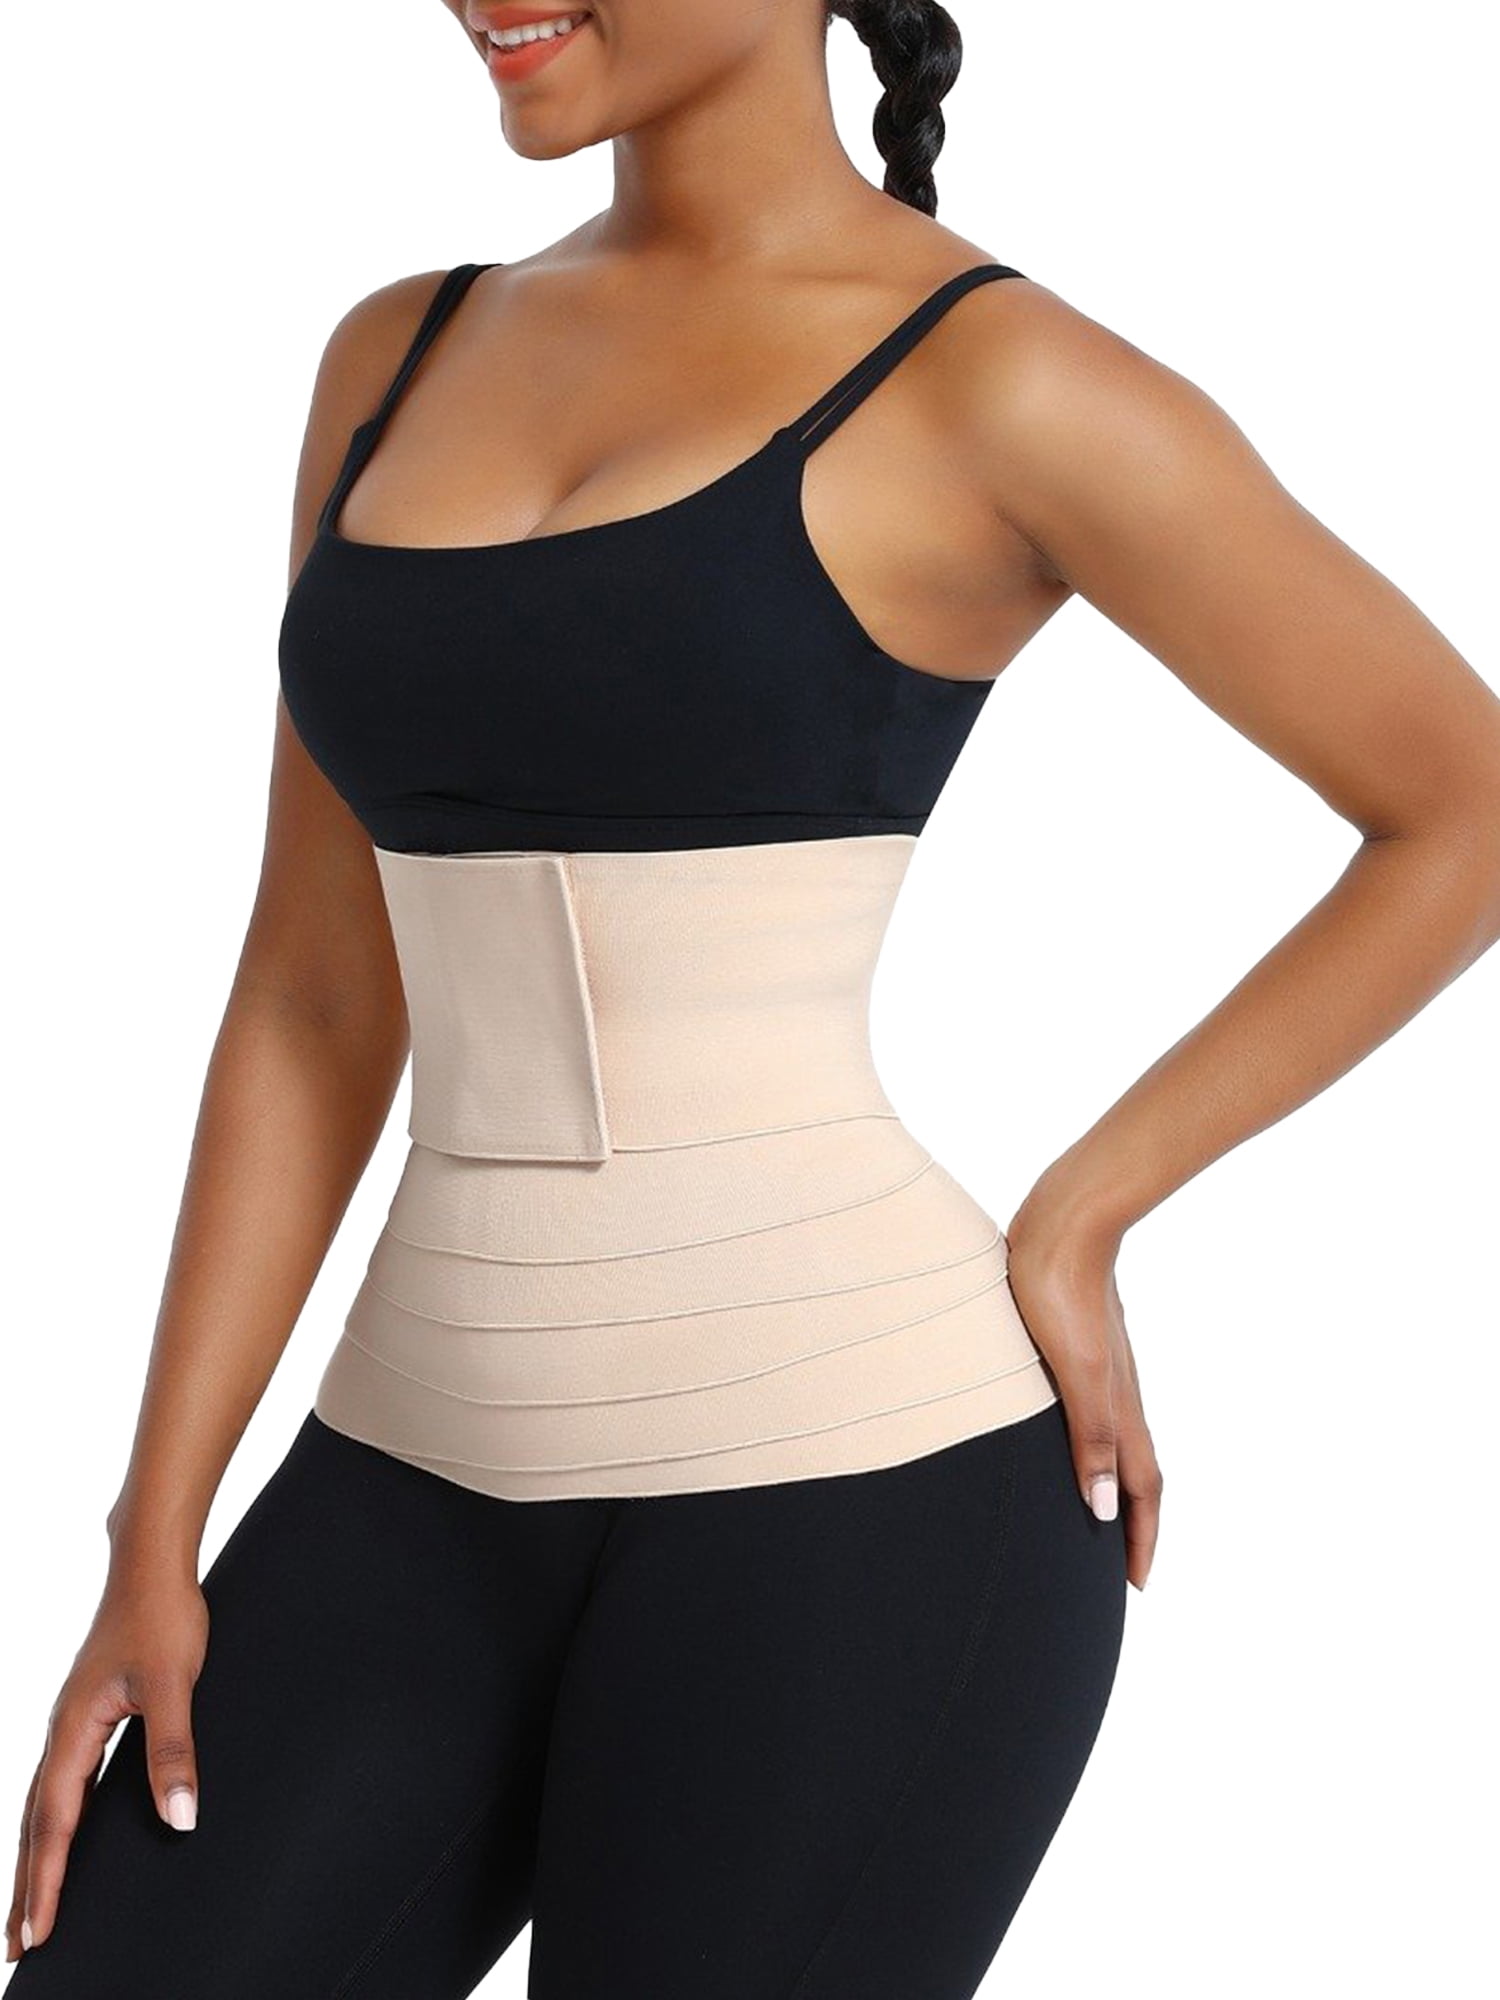 Details about   3 in 1 Leg Trimmers Body Shaper High Waist Belt Slimmming Thermo Thigh Trainers 